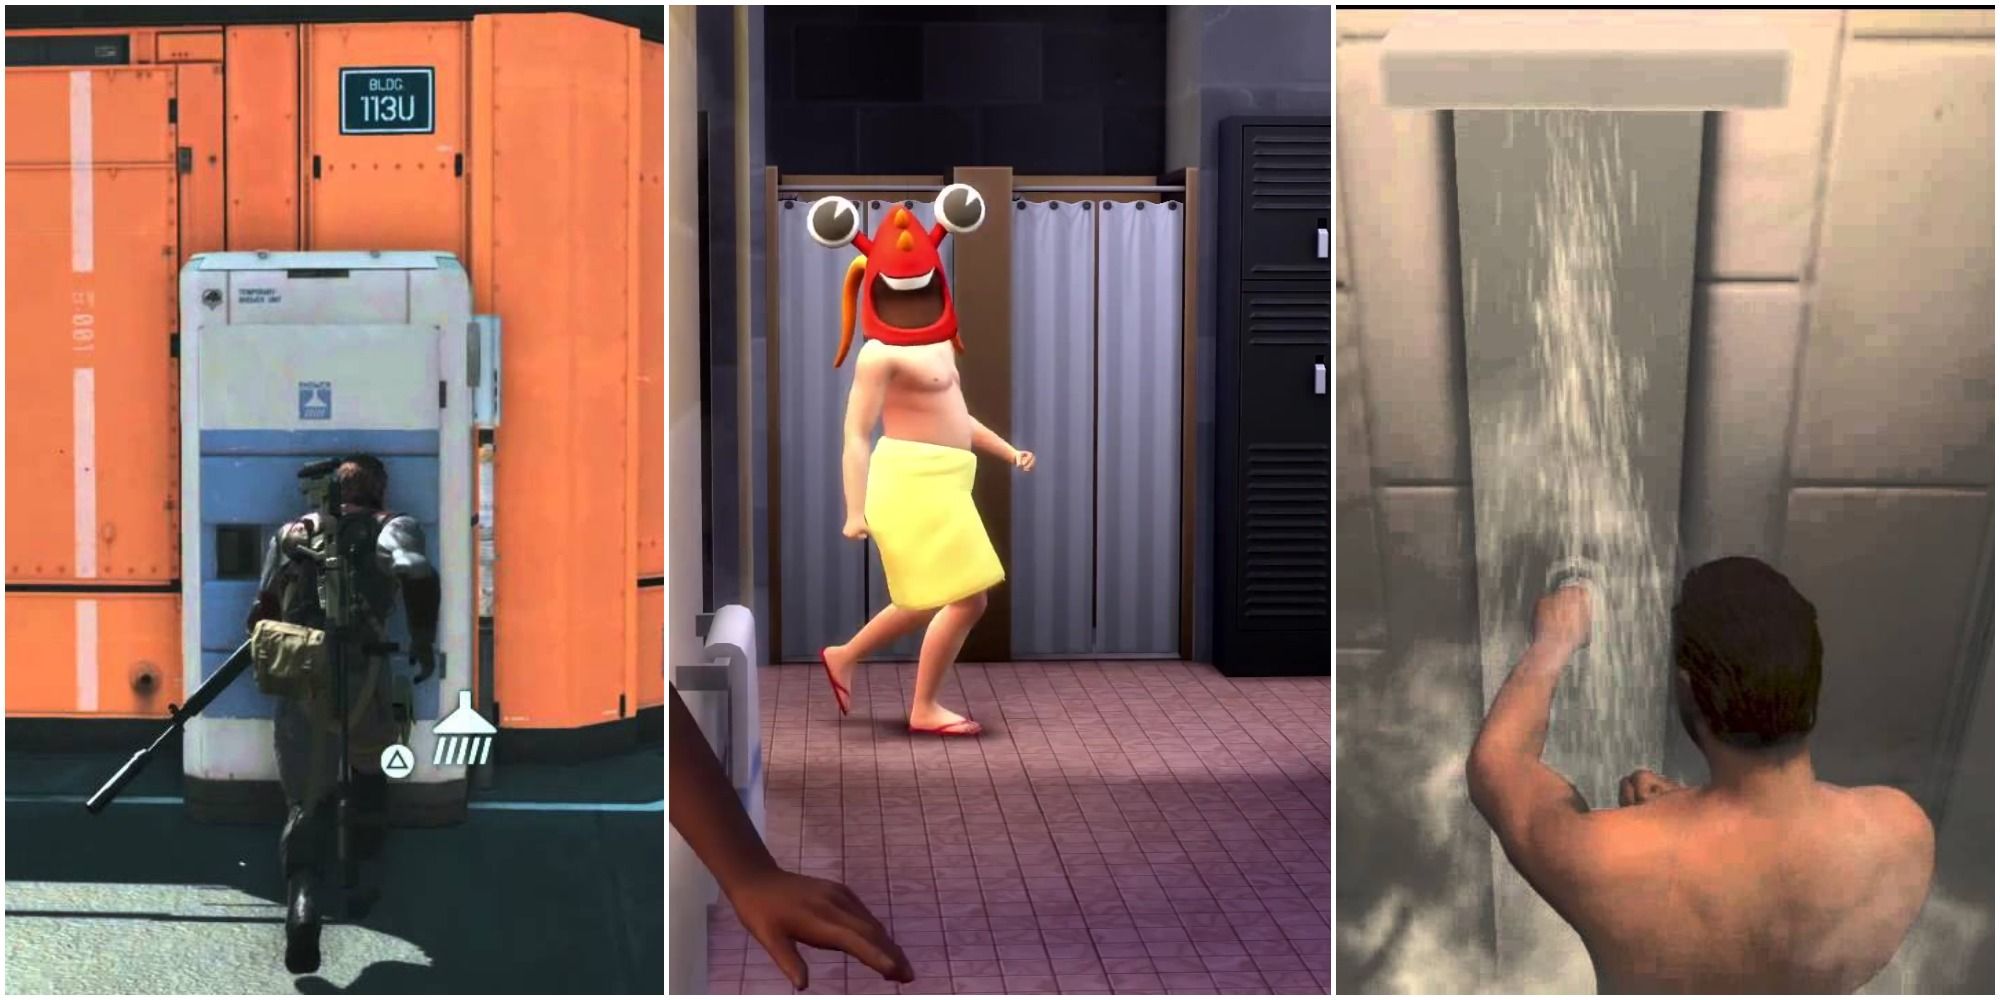 A split image from left to right: Snake running towards shower, Sim with lobster head walking into shower room, and GTA V character showering